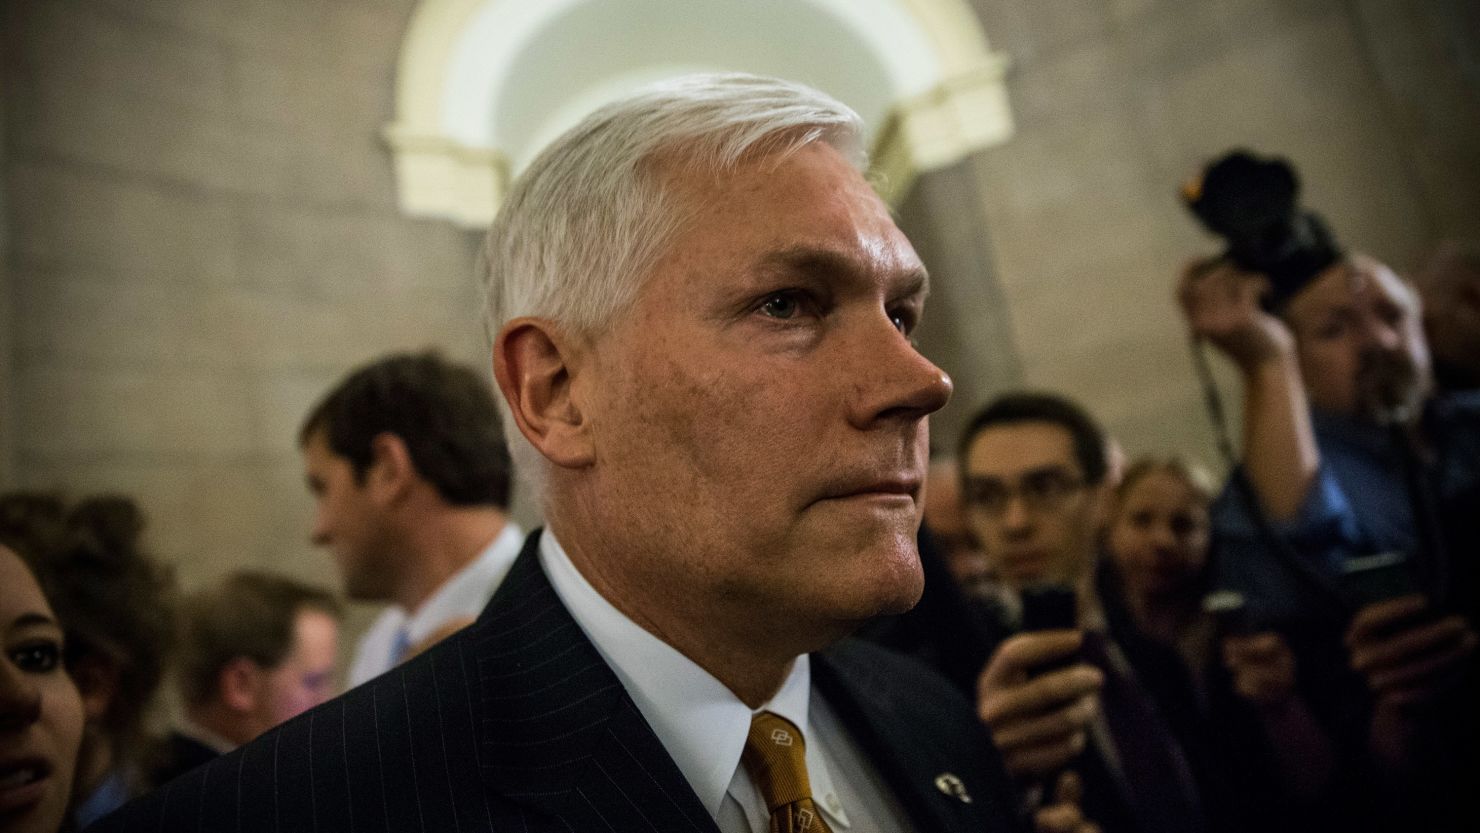 Texas Republican Pete Sessions drops bid to replace Eric Cantor in House leadership